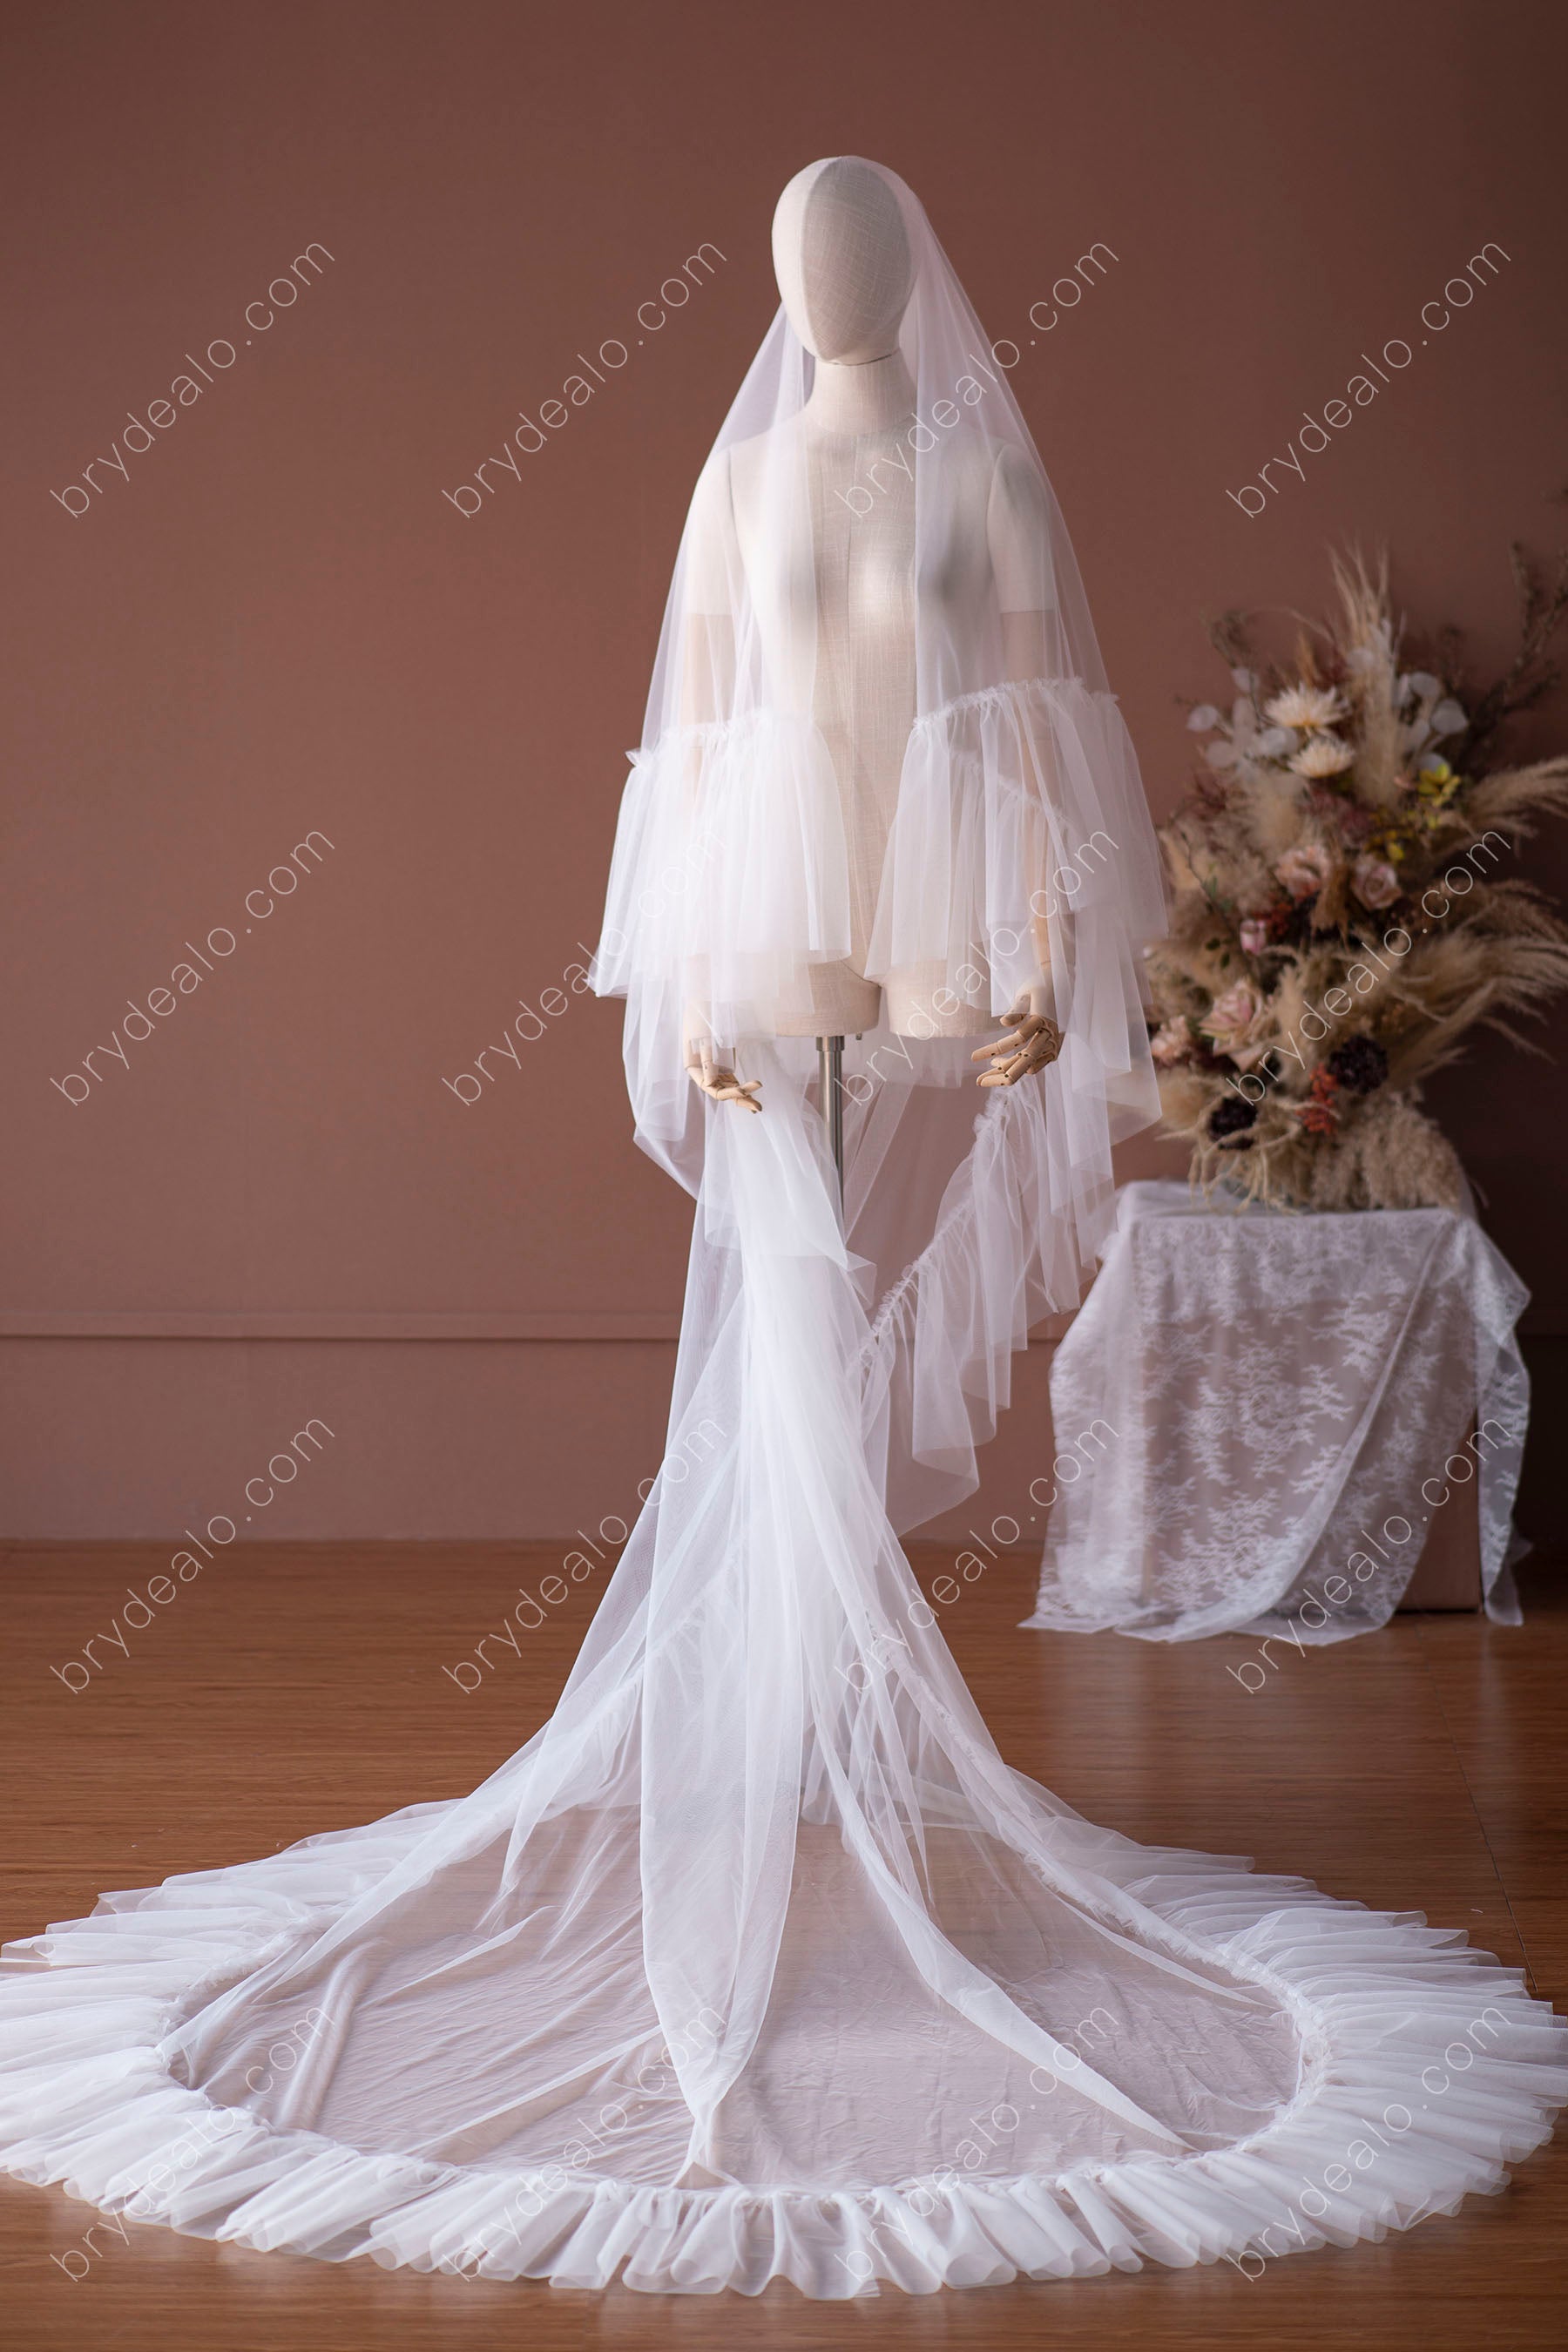 One Blushing Bride Pearl Cathedral Length Wedding Veil with Scattered Beading White / 1 Layer Veil